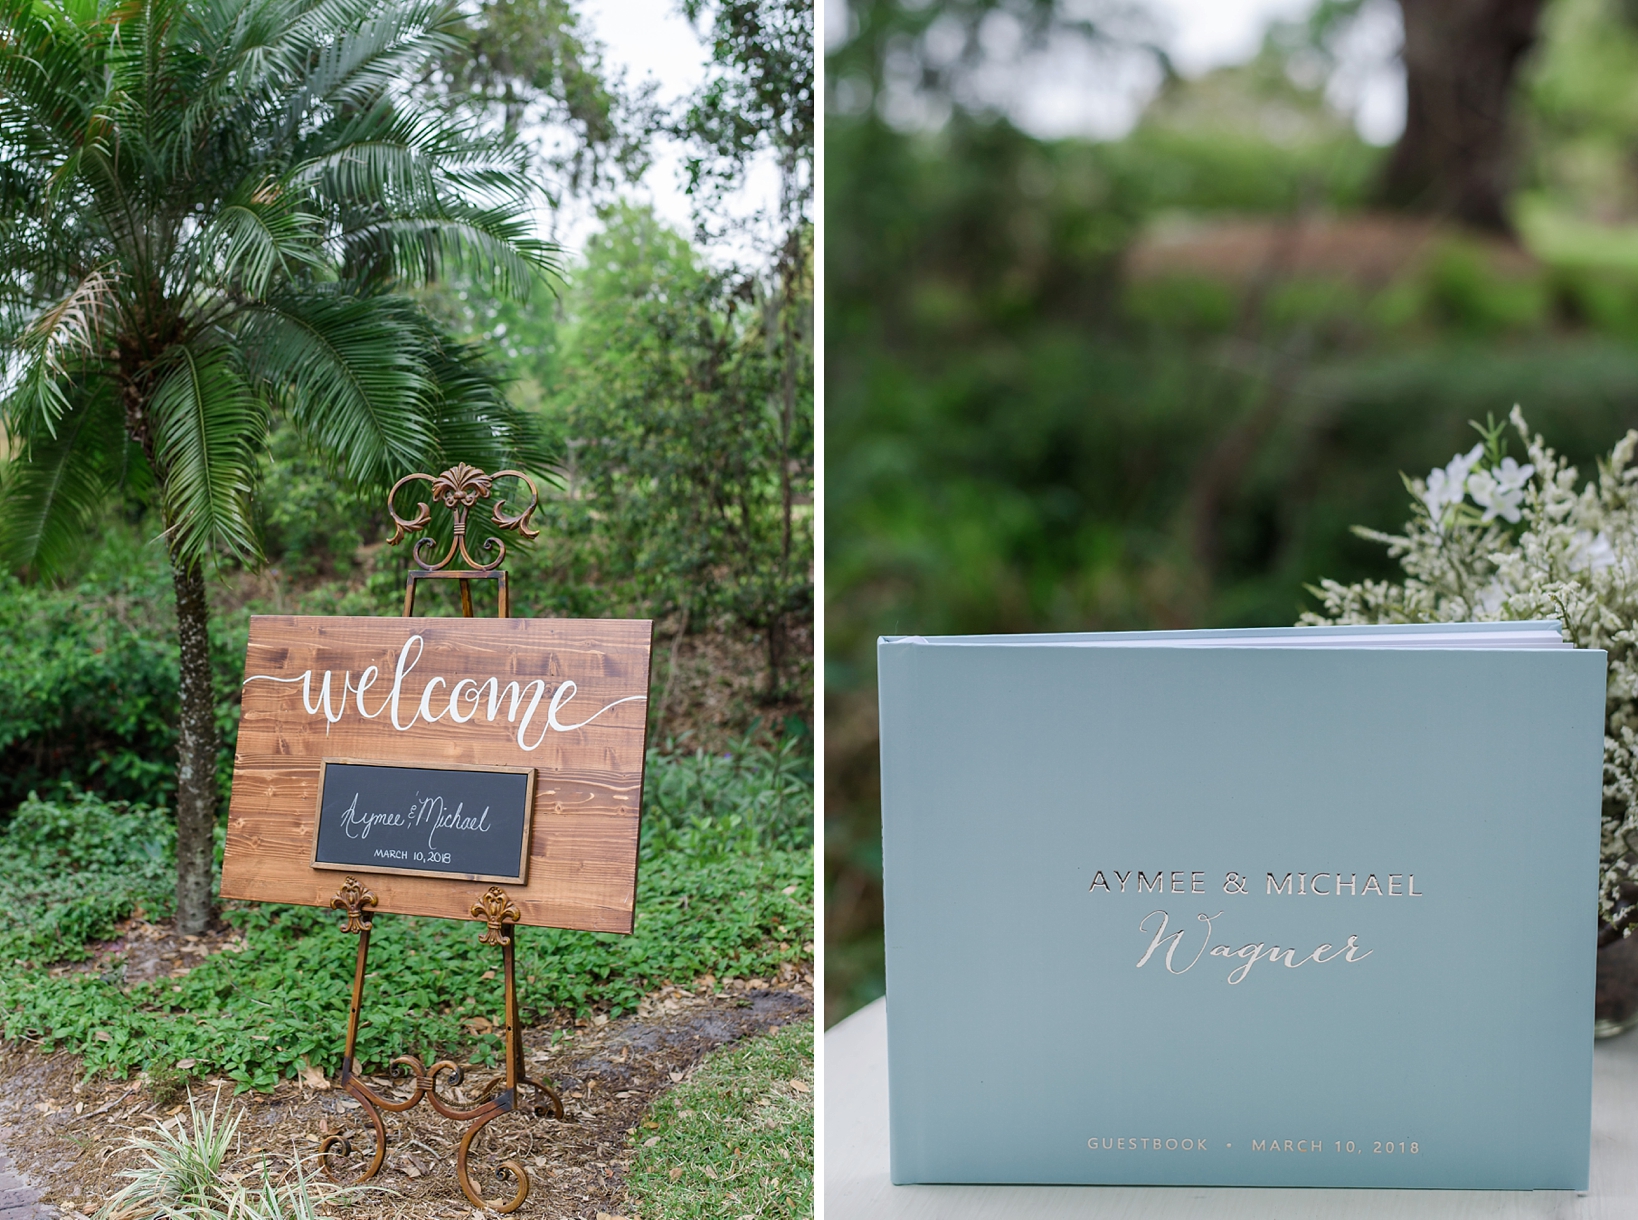 Welcome sign with handwritten cursive and the guestbook album in Tiffany Blue